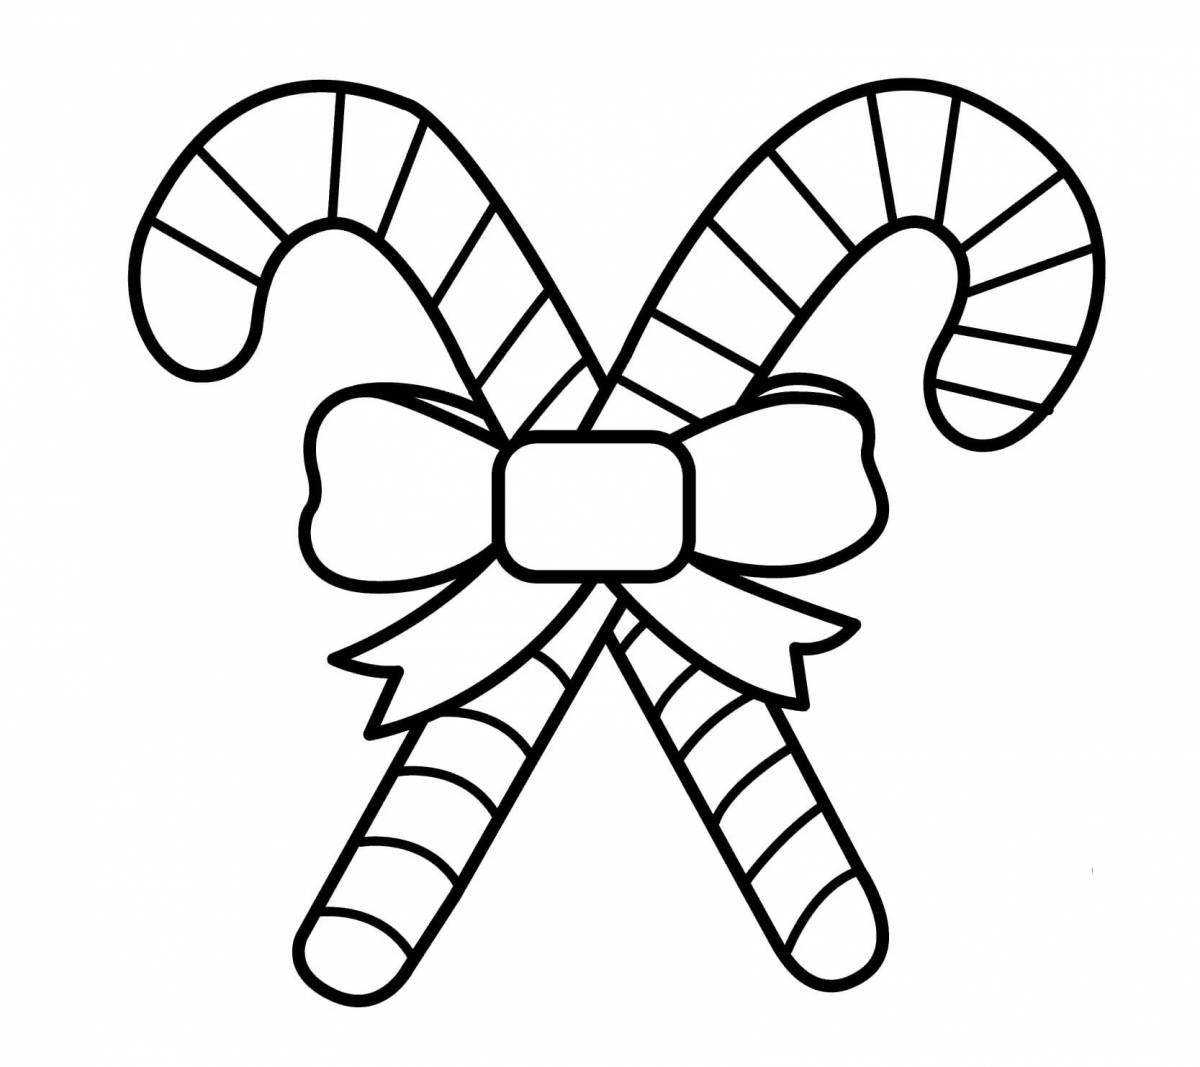 Adorable candy cane coloring page